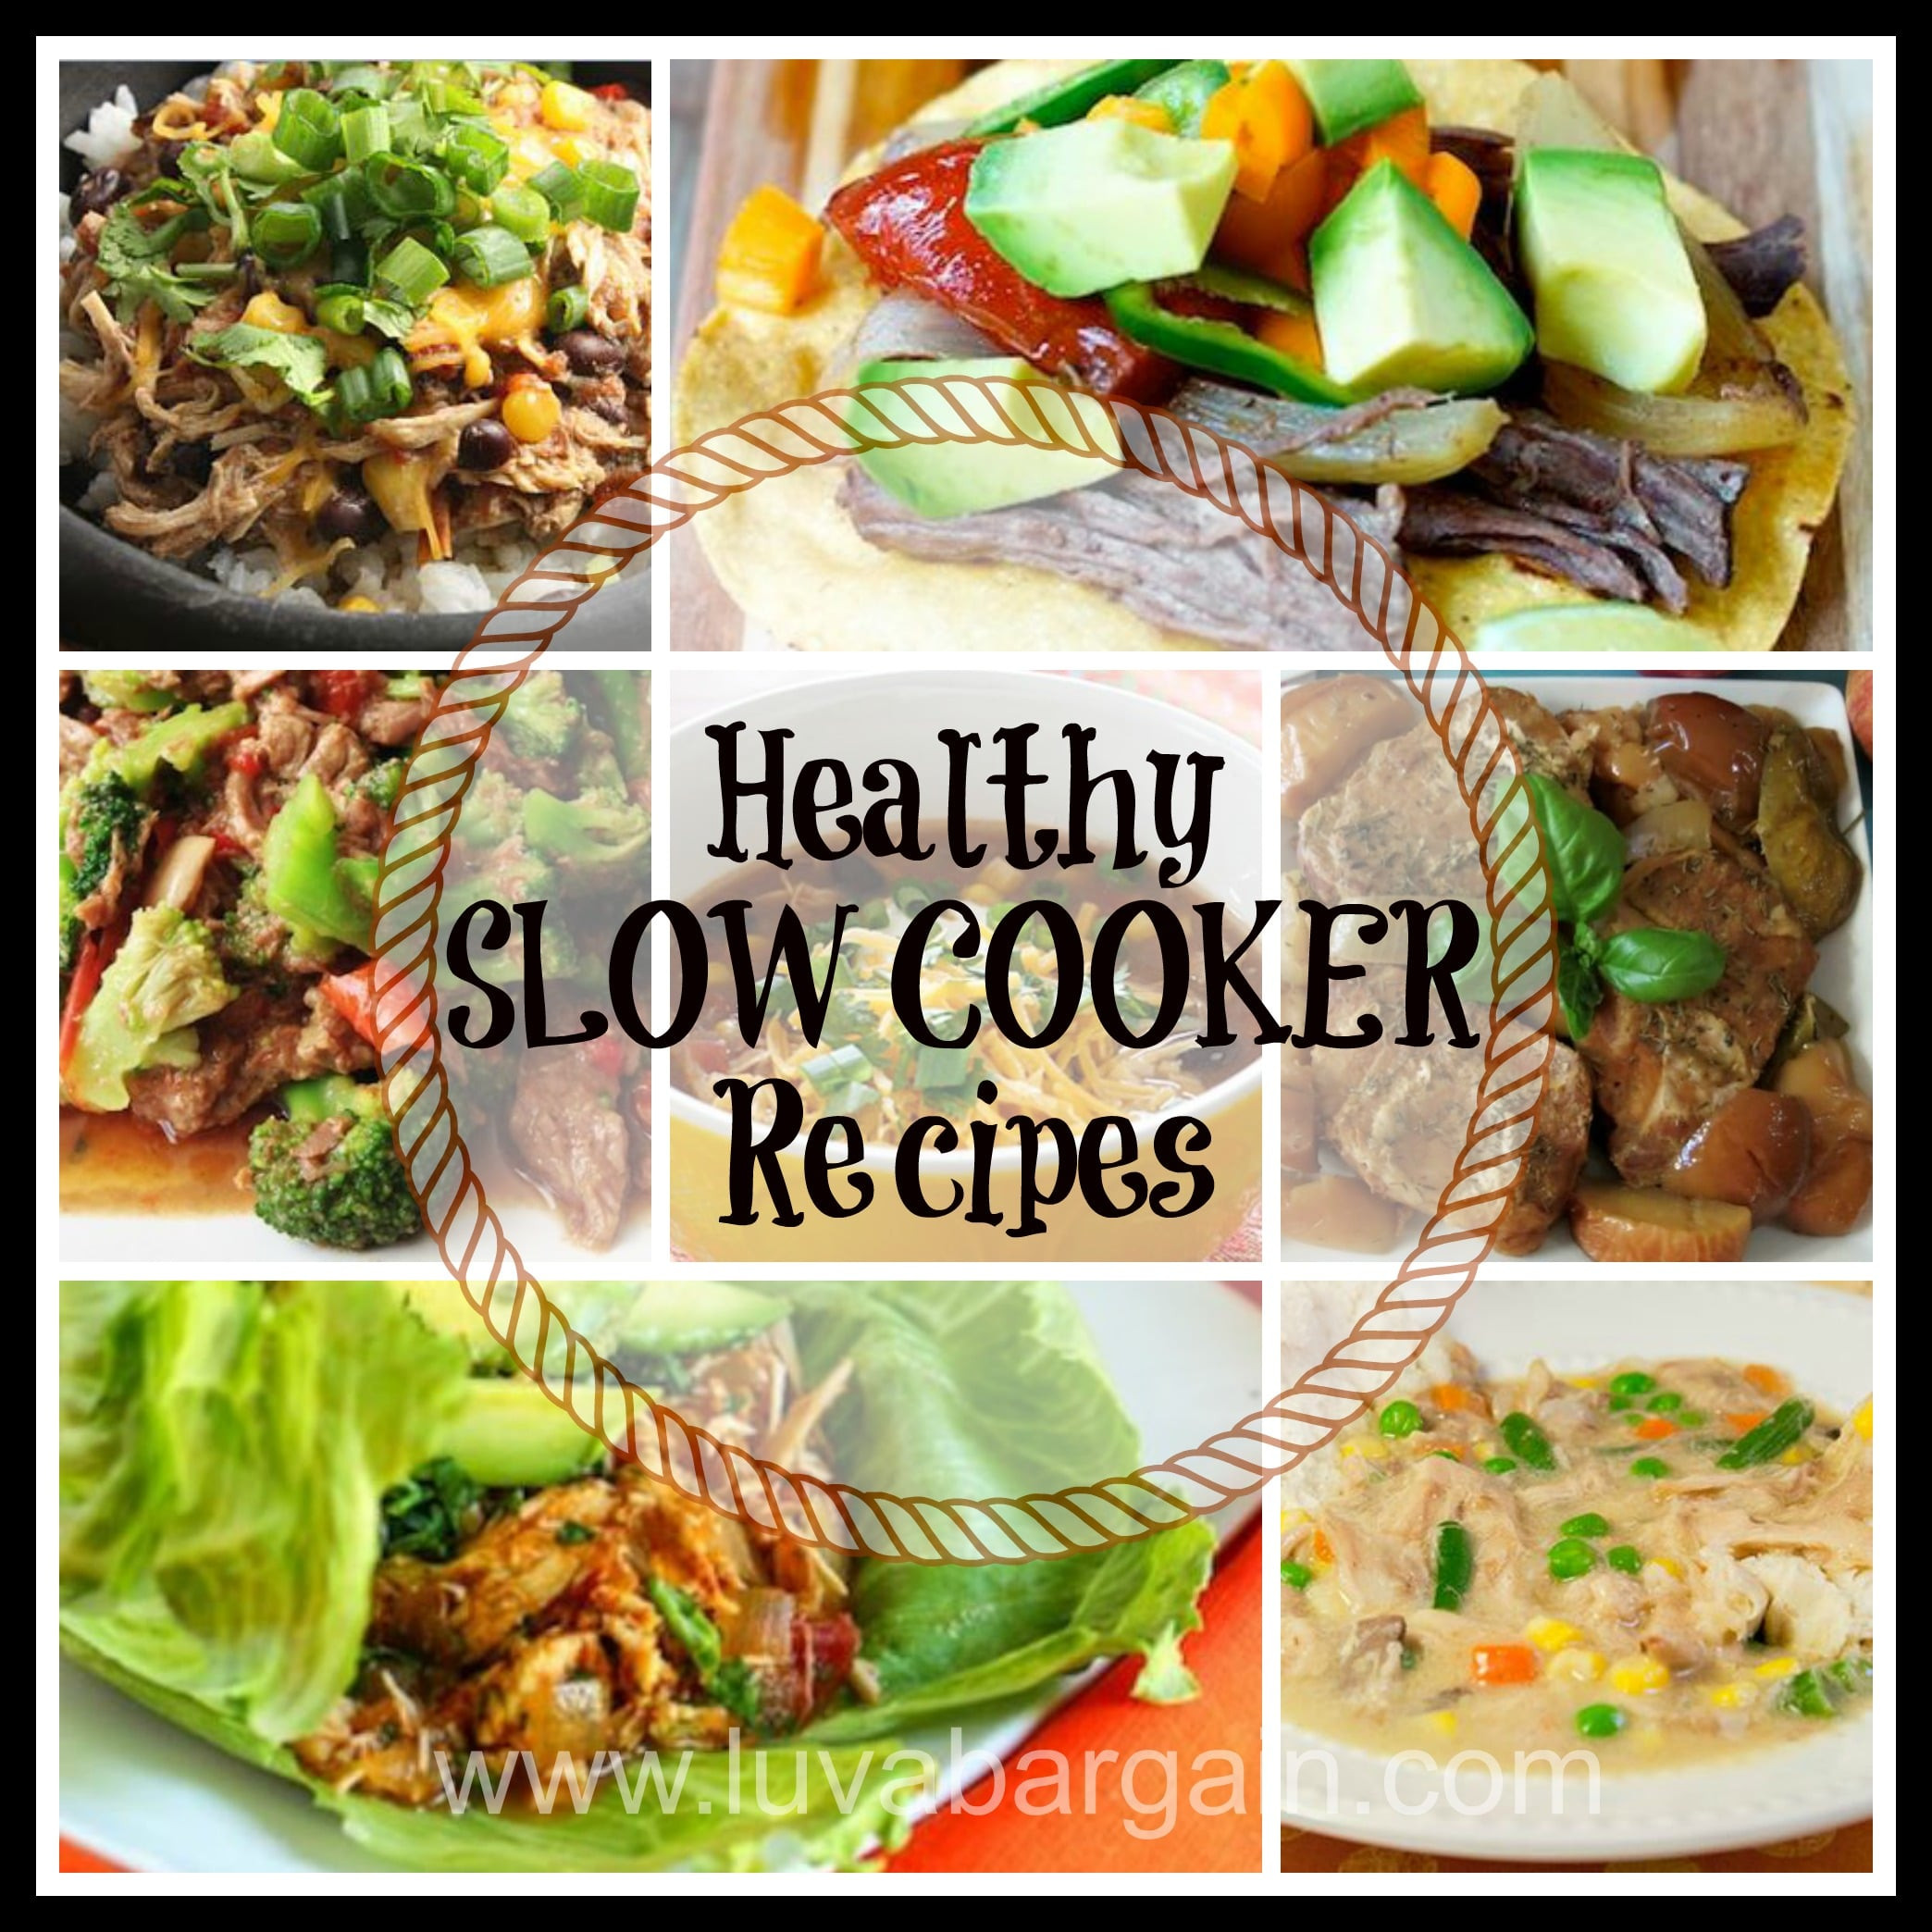 Slow Cooker Healthy Recipes
 Healthy Slow Cooker Recipes